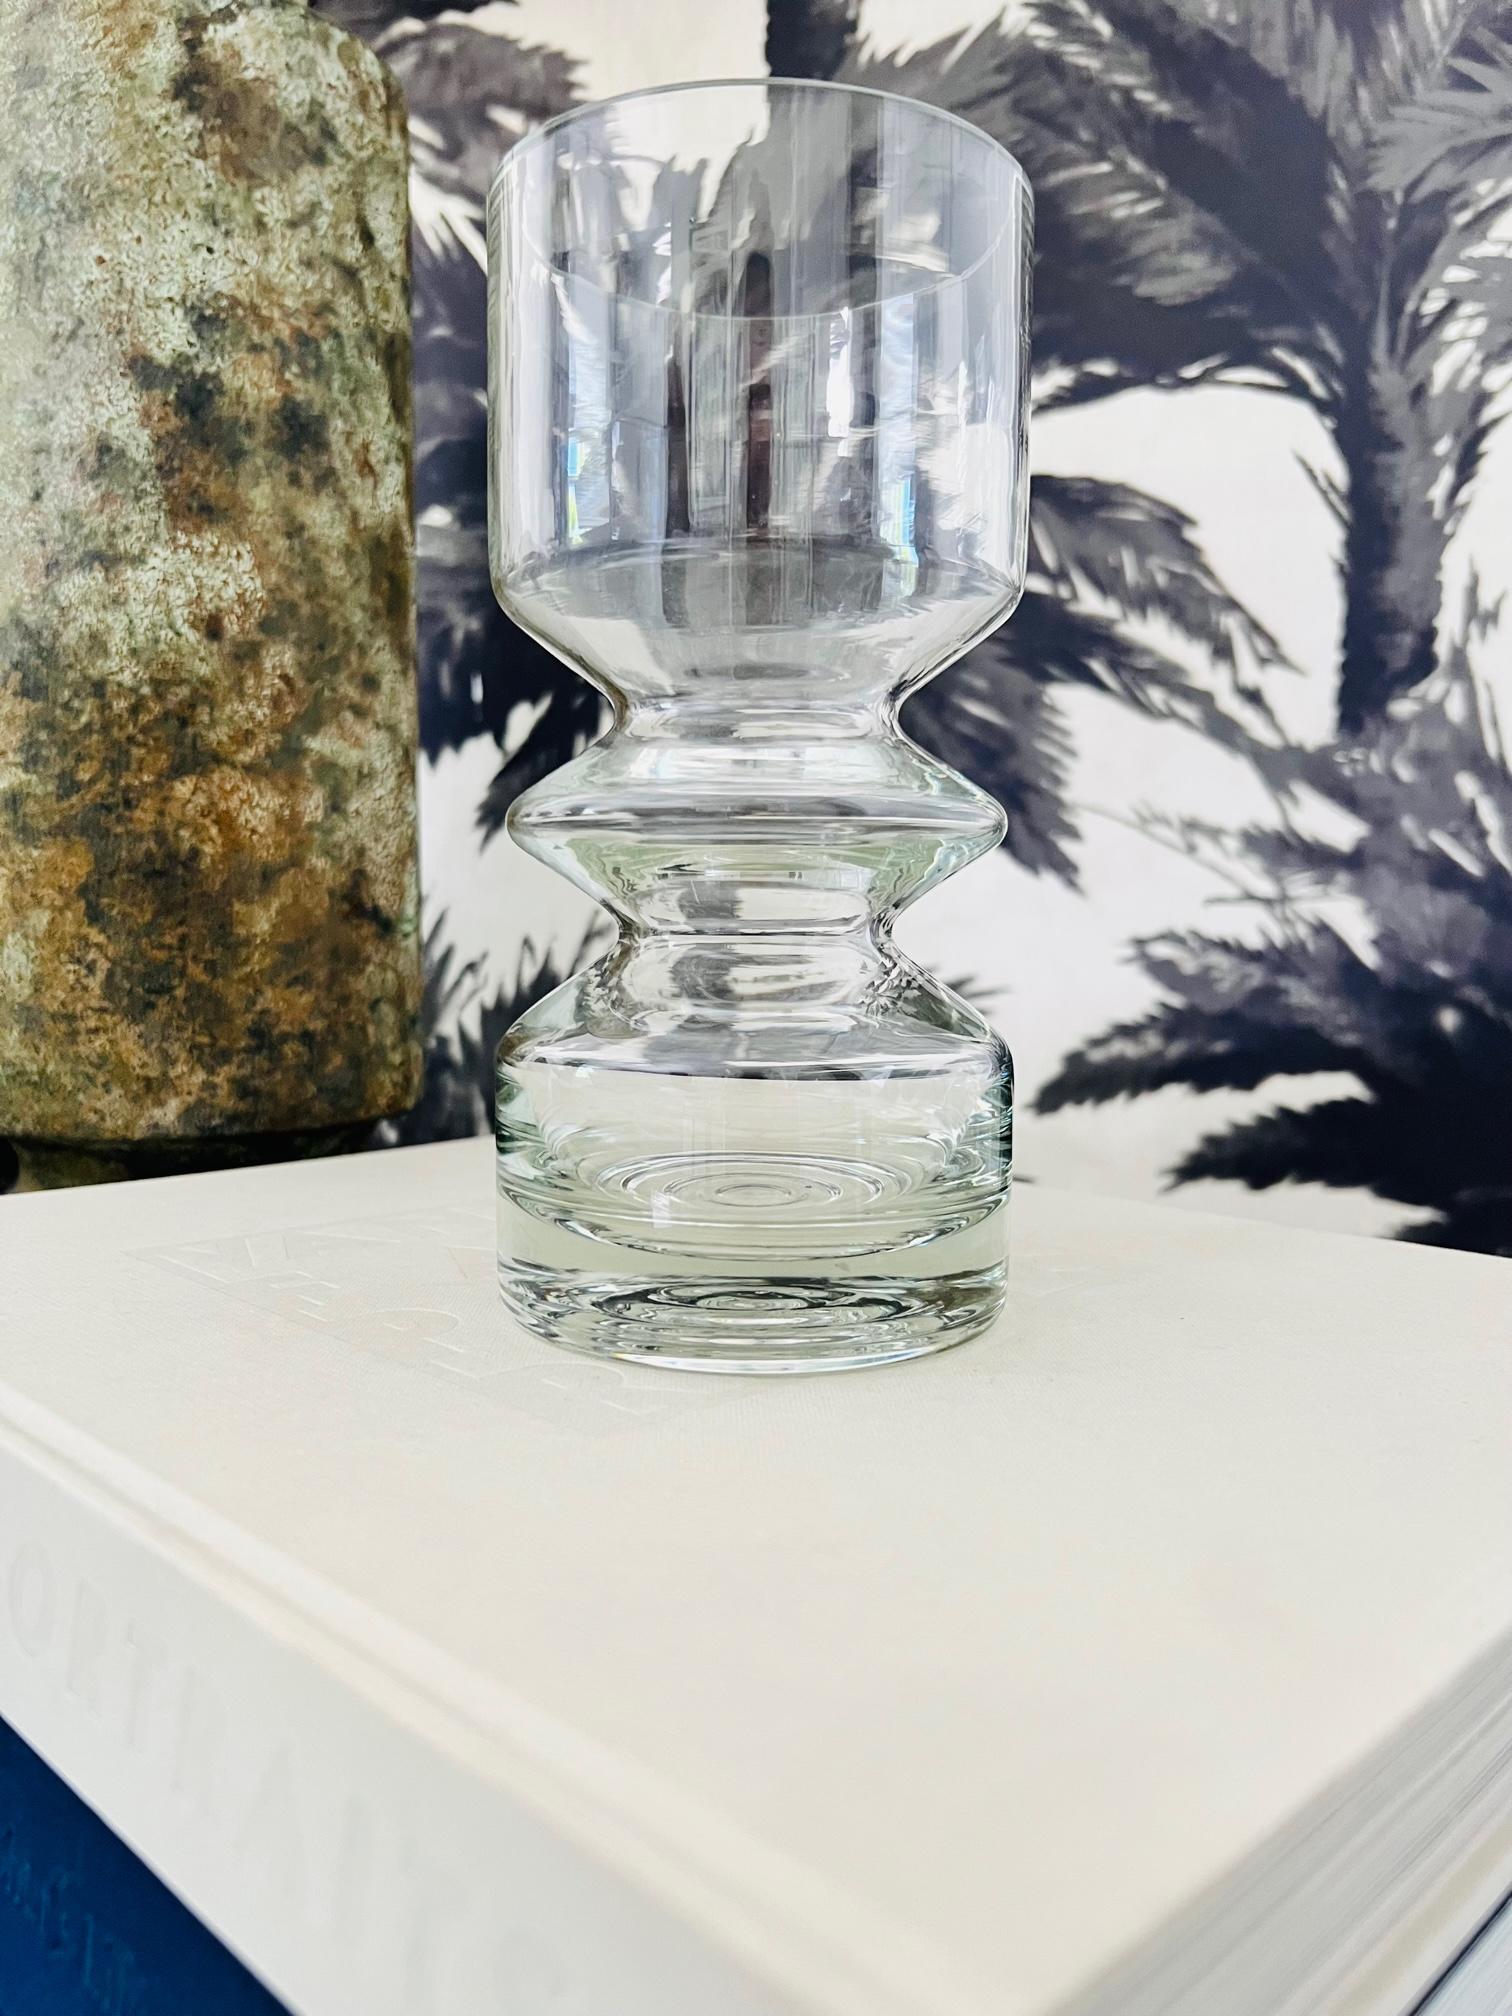 Mid-Century Modern blown glass vase with sculptural form features a hooped center with a tapered base design. Designed by Tamara Aladin for the iconic Riihimäen Glass company of Finland. Riihimäen Glass was in production from 1910-1990, and are